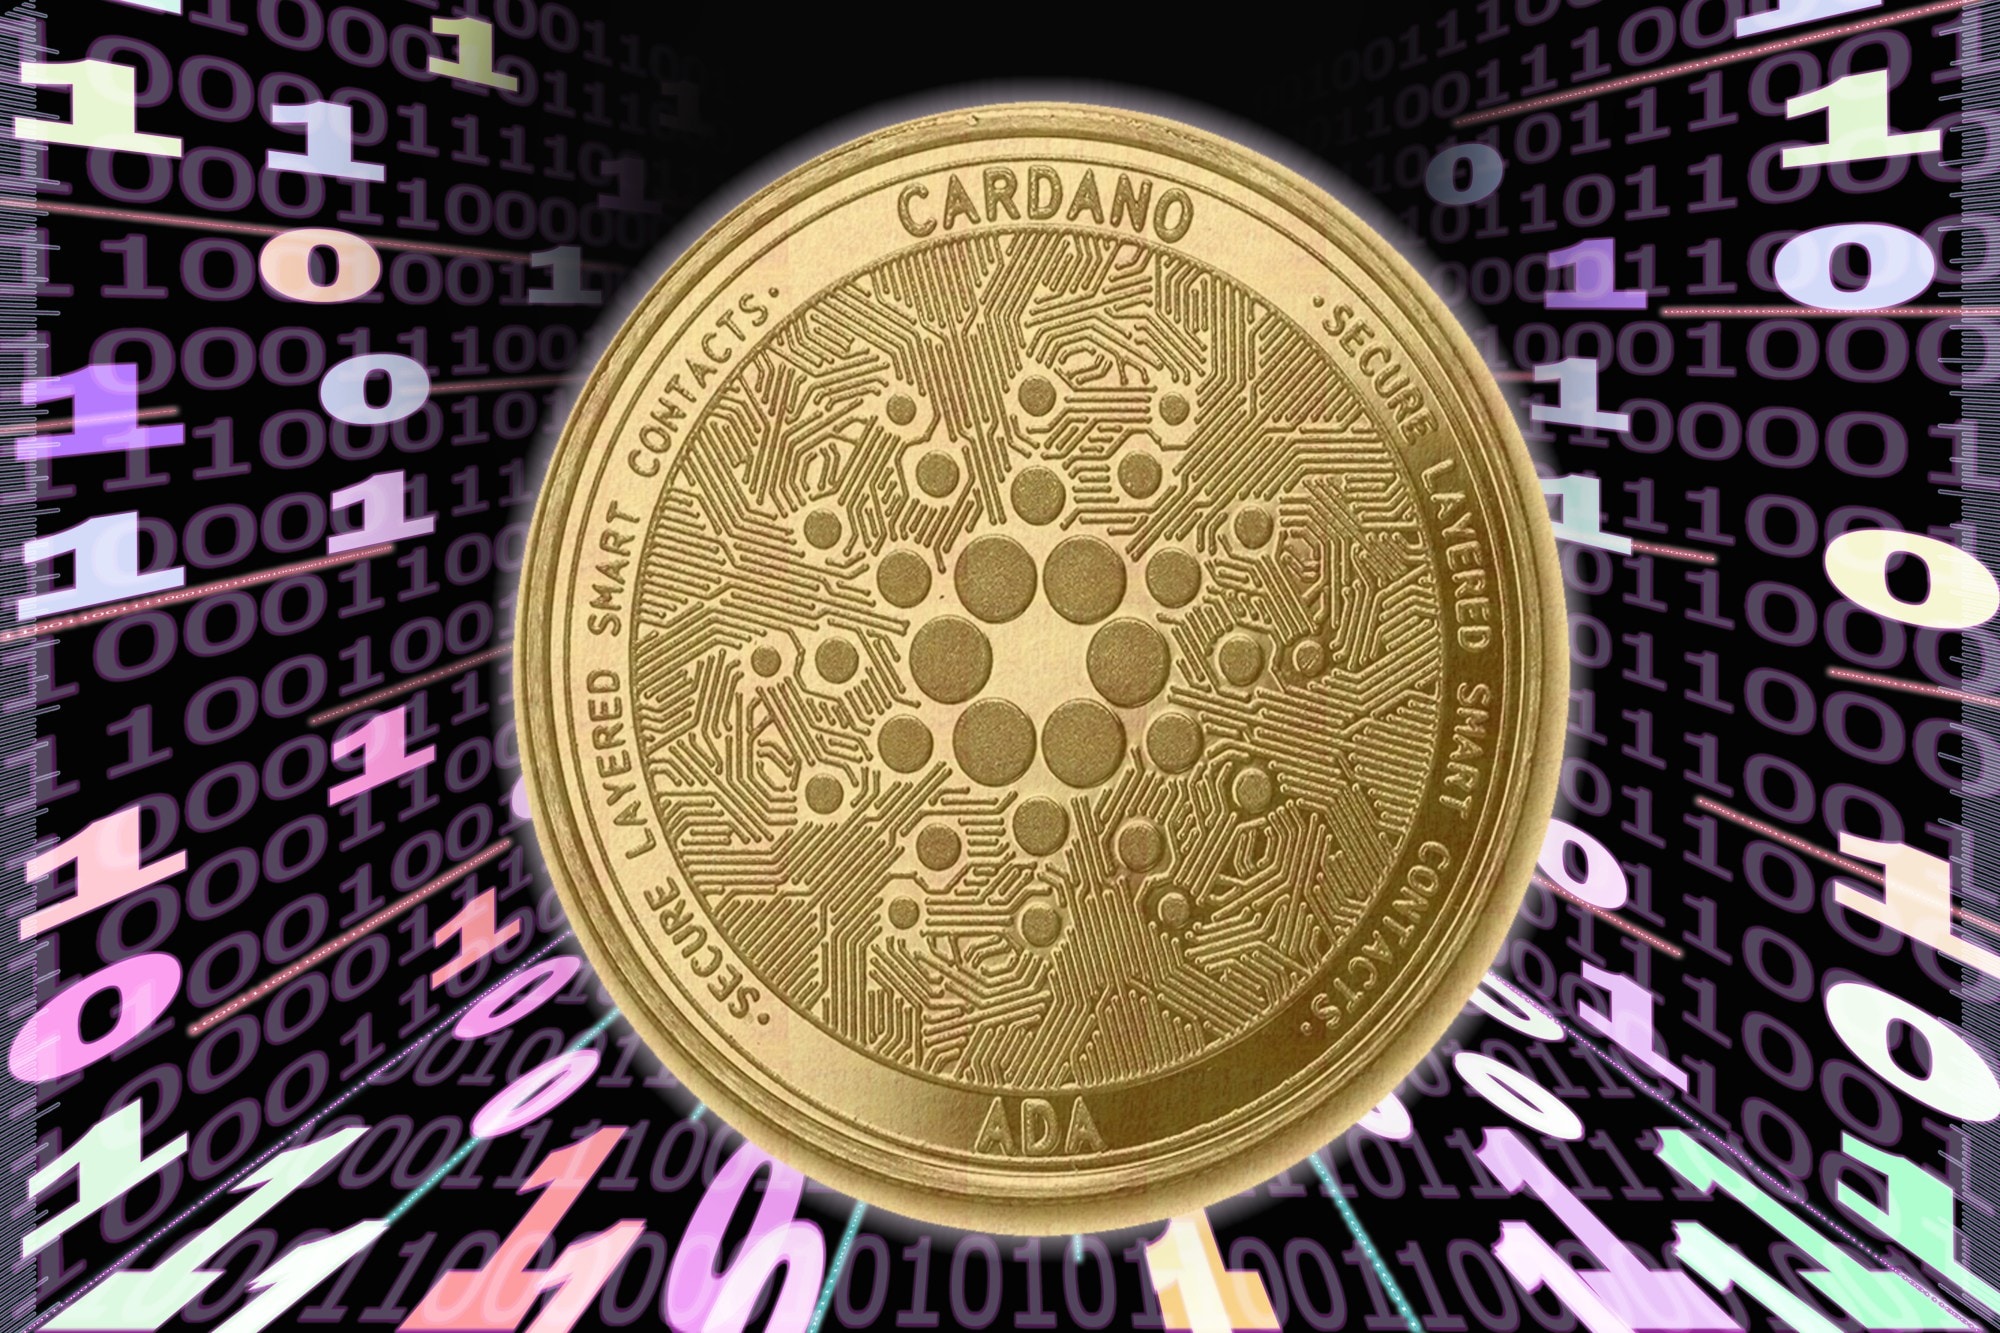  Cardano:  Starting out as a project called 'input-output Hong Kong' created by Ethereum co-founder Charles Hoskinson in 2017, Cardano is one of the few cryptocurrencies that does not use a white paper. Instead, it utilises another blockchain technology called Proof-of-stake protocol which consumes less energy than the proof–of–work protocol used by cryptos like Bitcoin. Price: 103.4. Mcap: USD 49 billion; YTD: 644.4%.